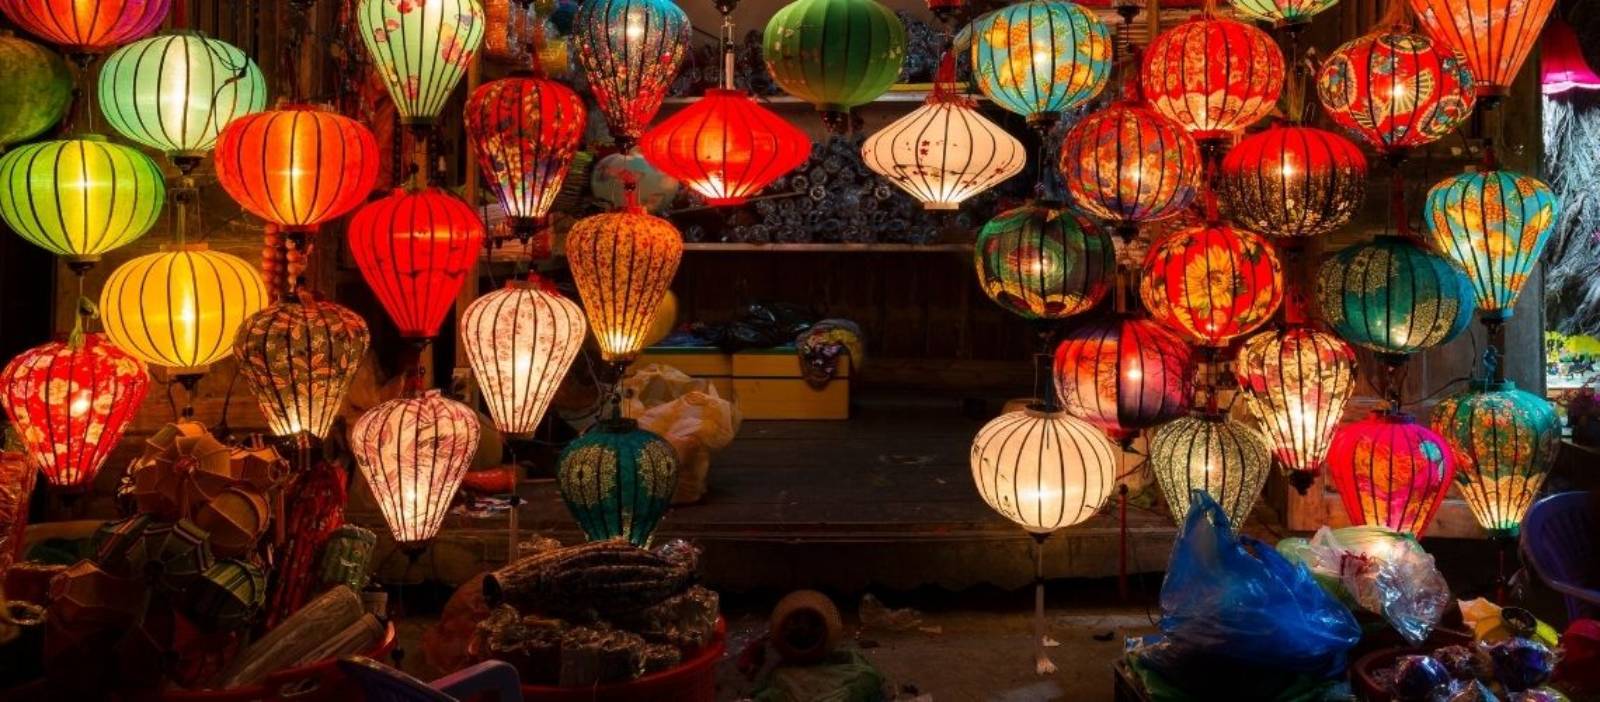 Top 10 Things To Do In Hoi An